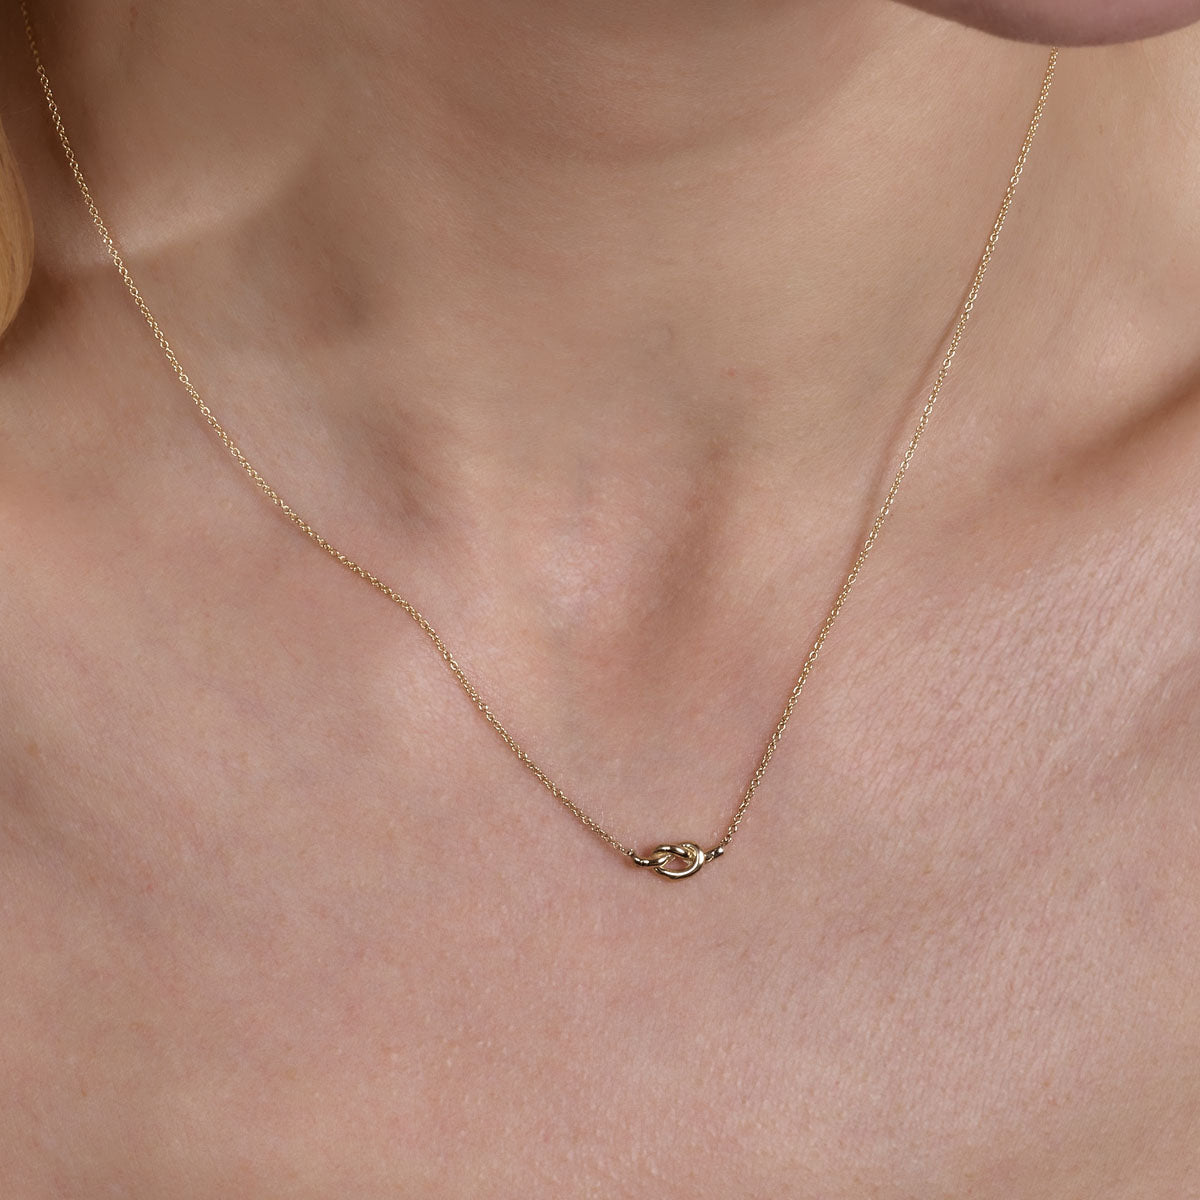 gold love knot necklace on womans neck